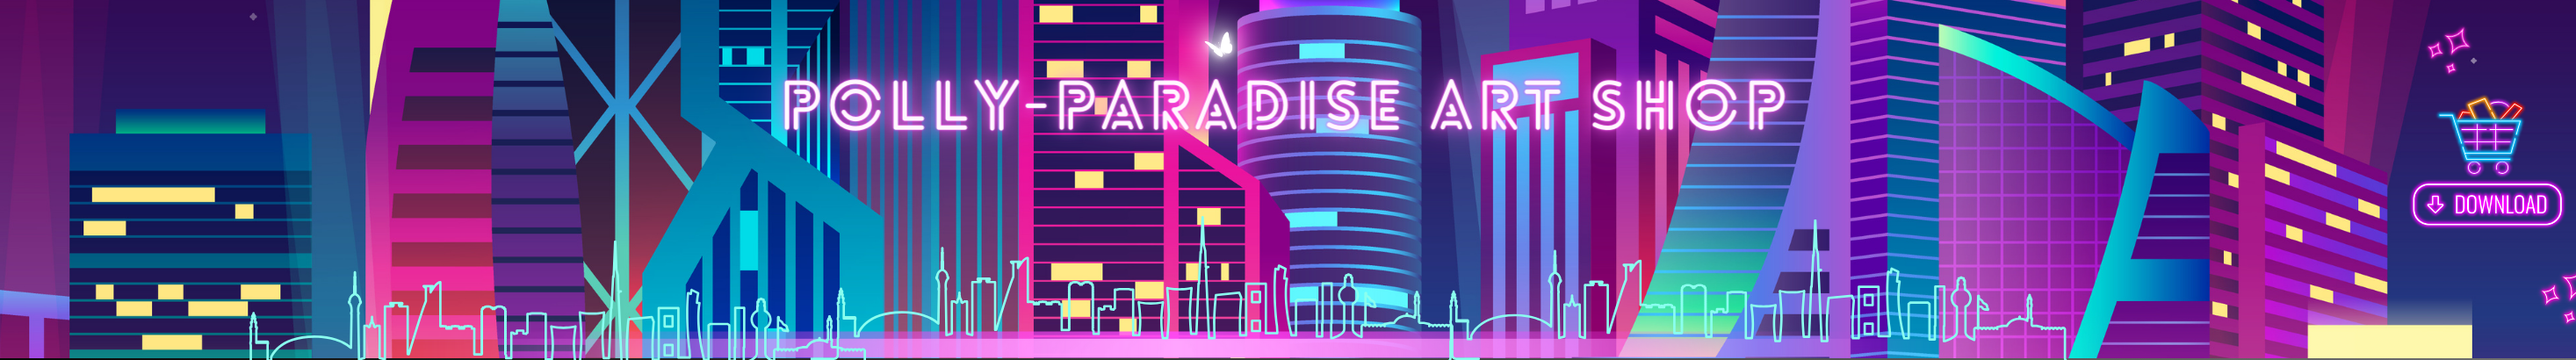 Polly- Paradise's profile banner